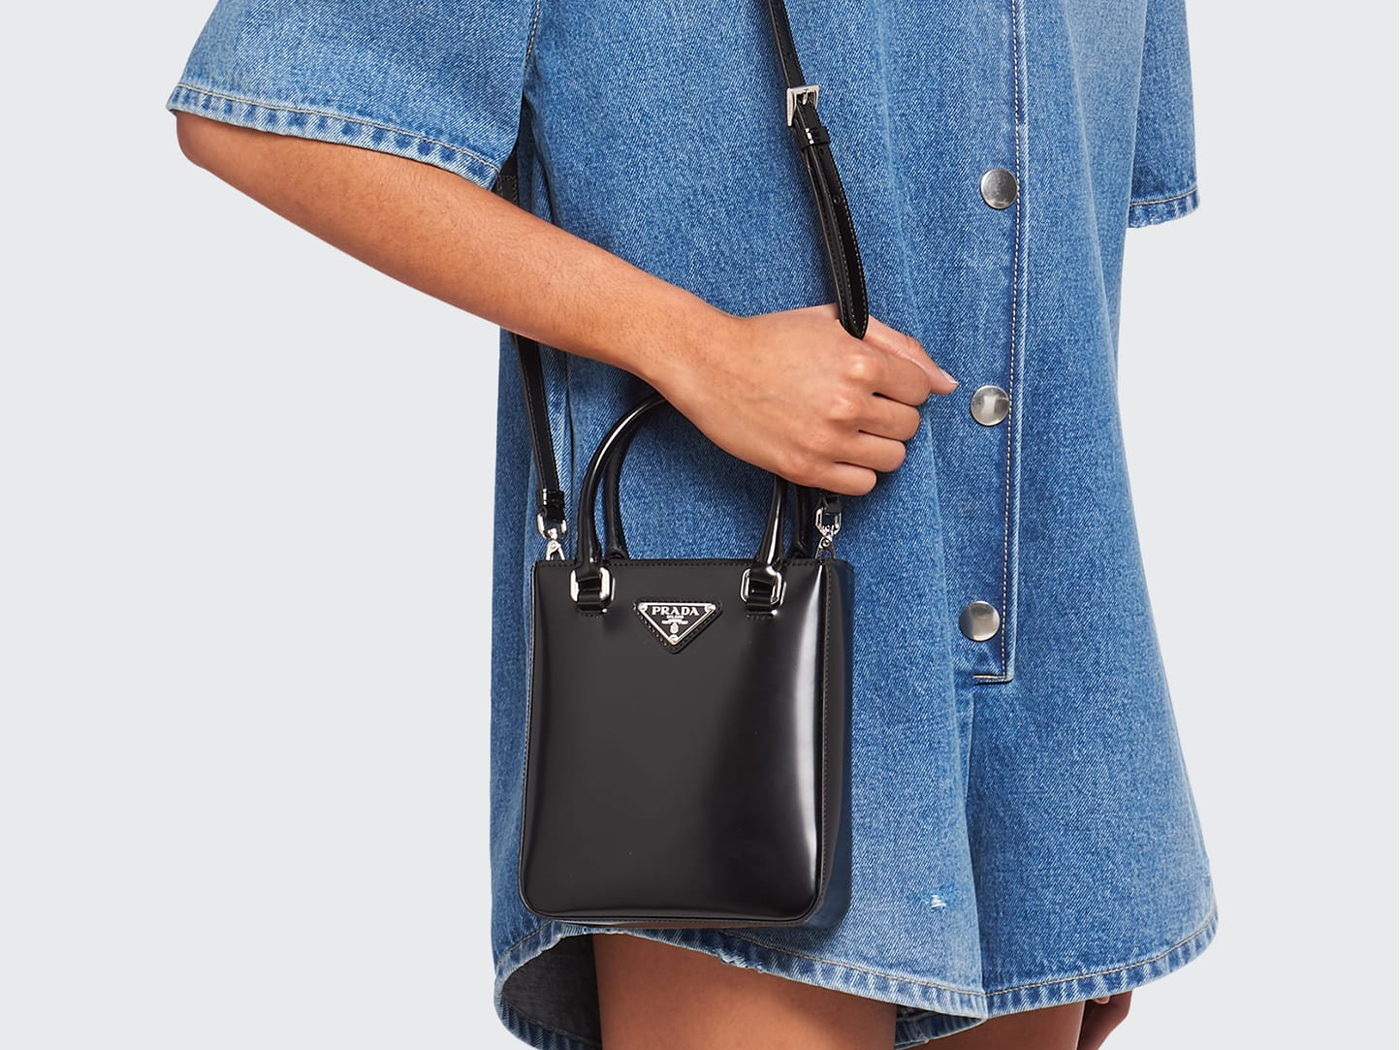 The Louis Vuitton Petit Sac Plat is NOT for everyone!! Its cute